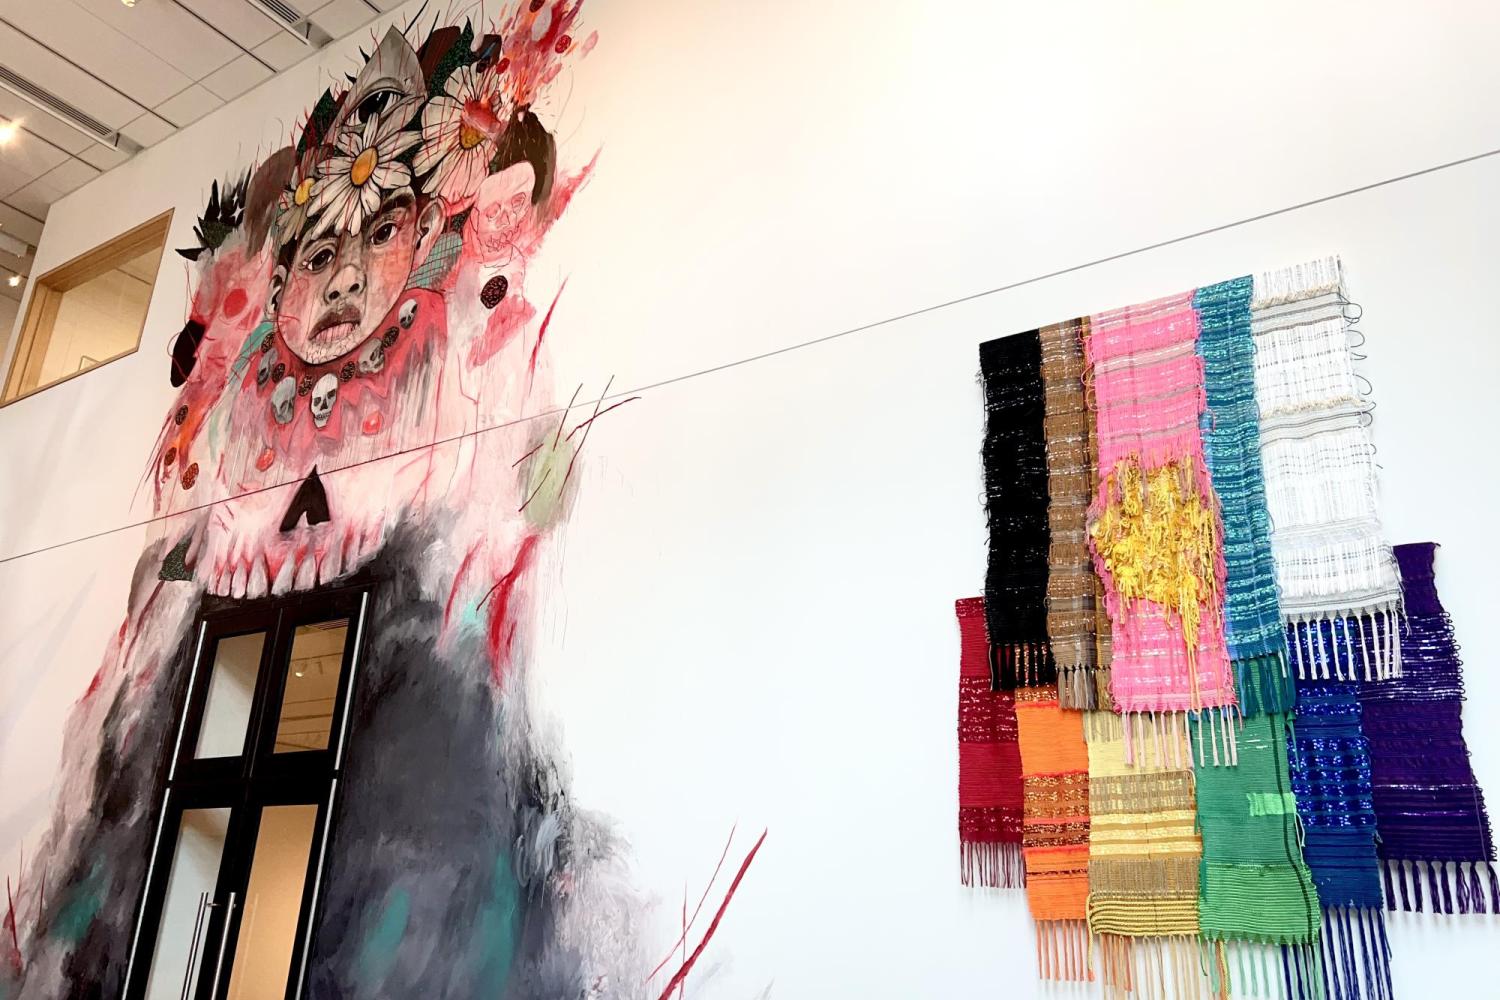 The large white lobby wall of the CU Art Museum, featuring a mural depicting a child wearing a necklace of skulls and a flower crown above the doors on the left, and a hanging rainbow flag made of knit fabrics, sequins, cords, and tassels to the right.